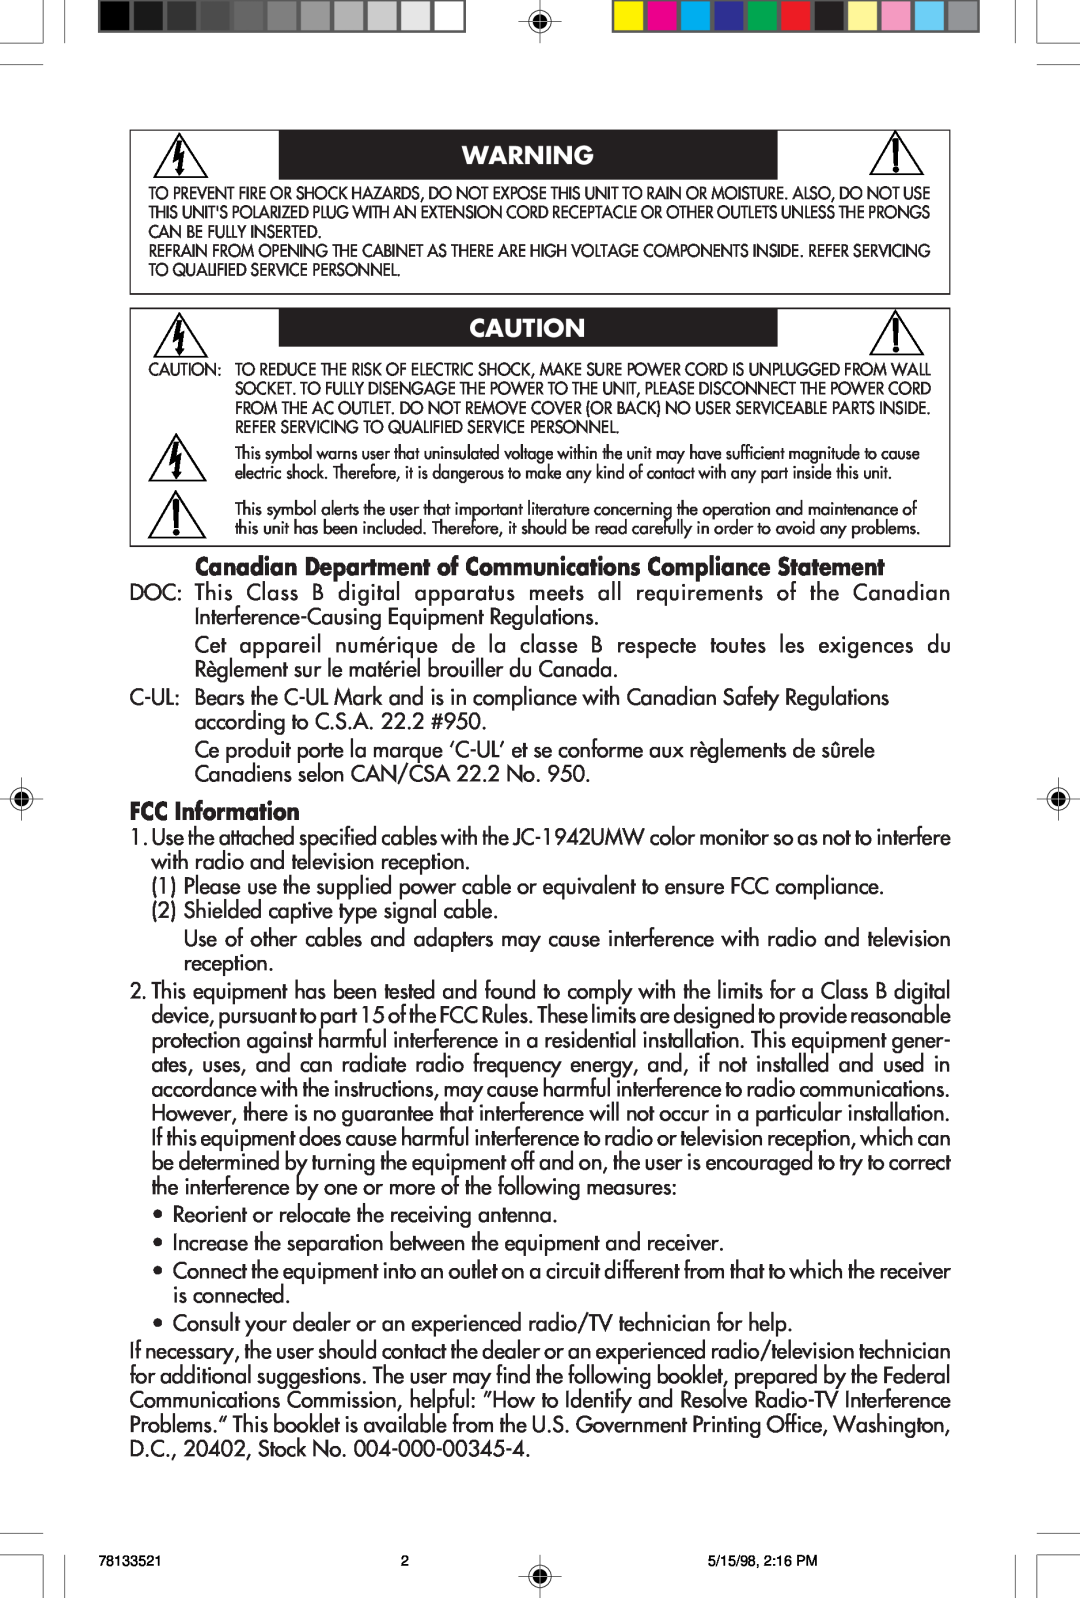 NEC E900+ user manual Canadian Department of Communications Compliance Statement, FCC Information 